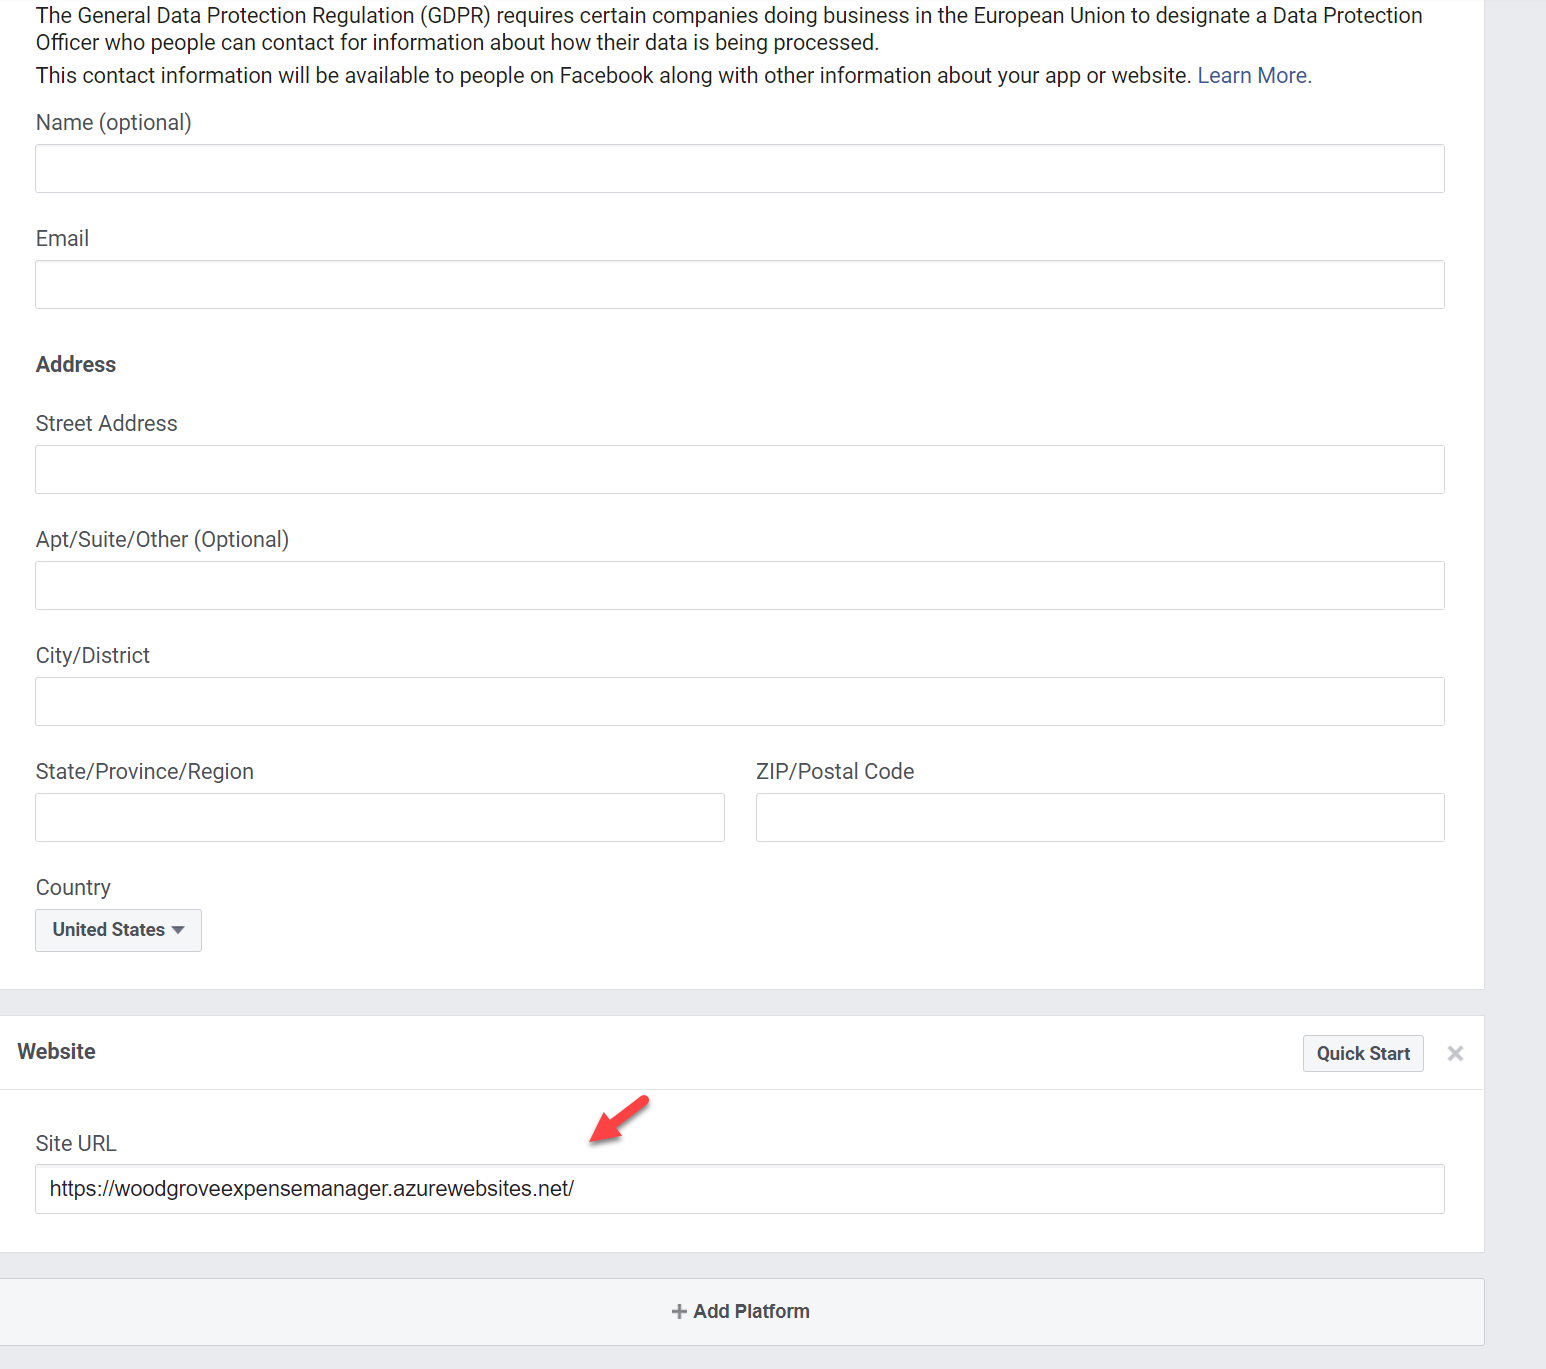 Facebook app url and privacy url settings